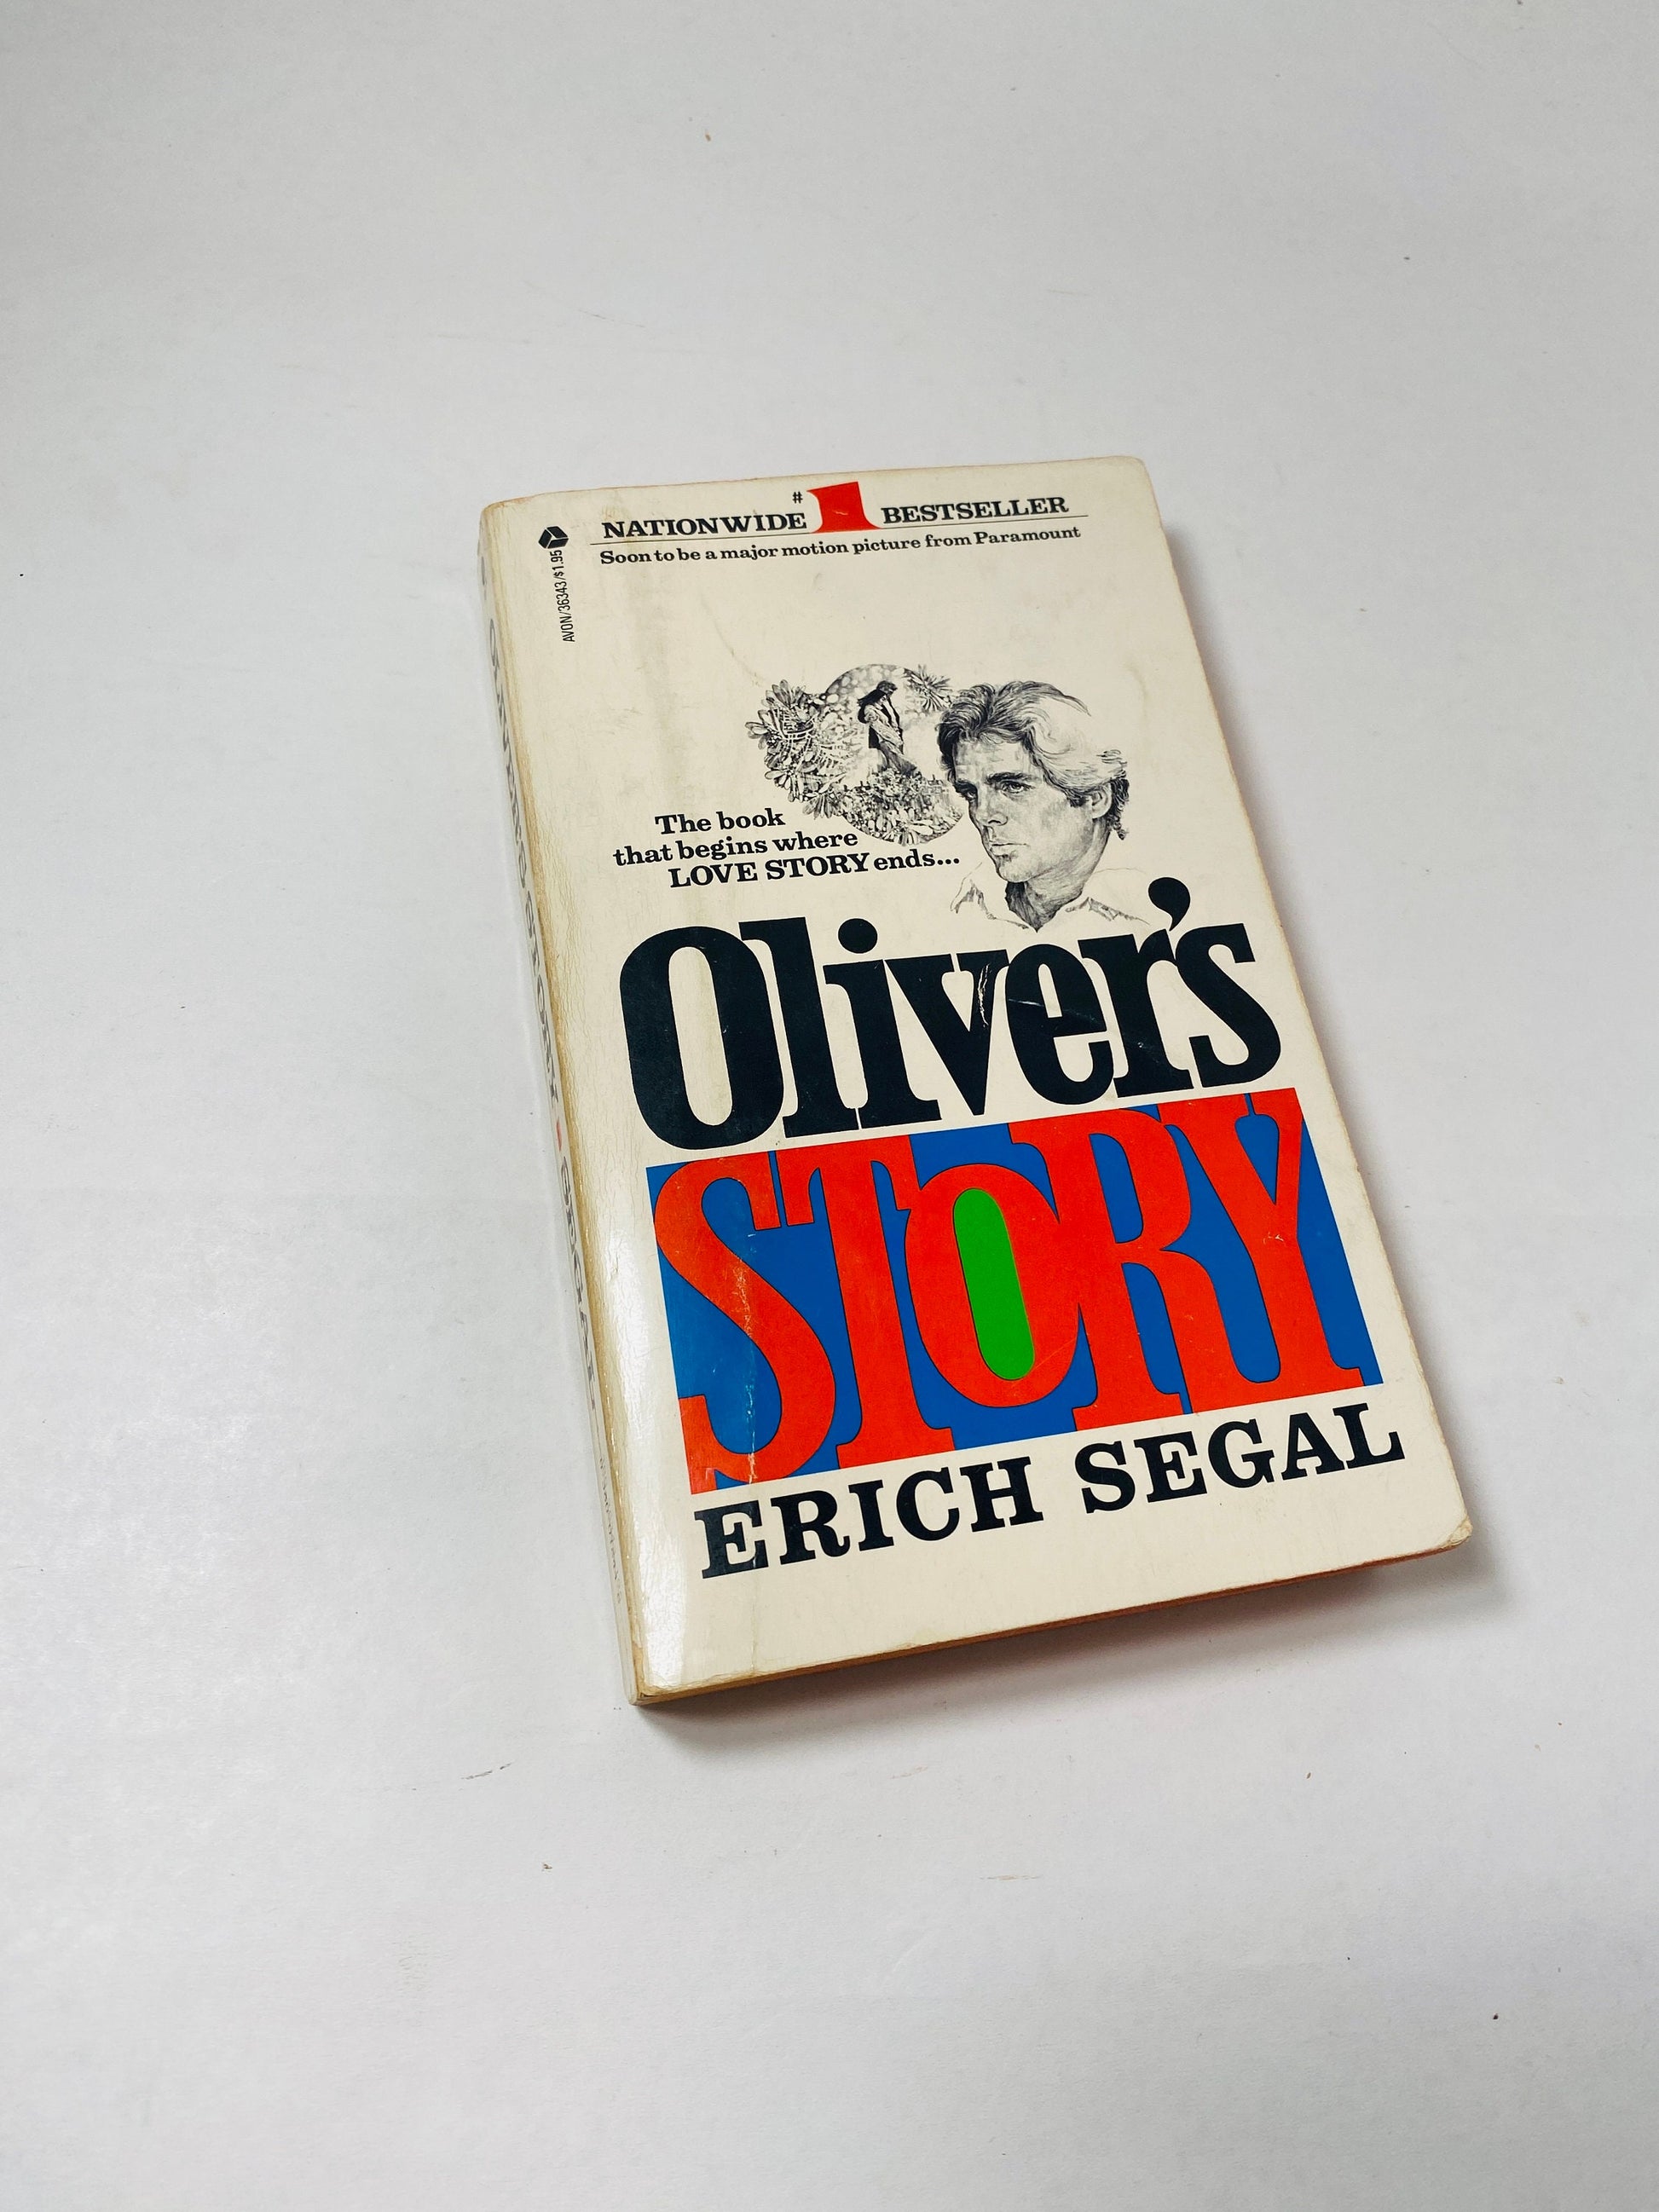 Oliver's Story by Erich Segal Vintage paperback book circa 19778 Romance after loss. Follow-up to Love Story.